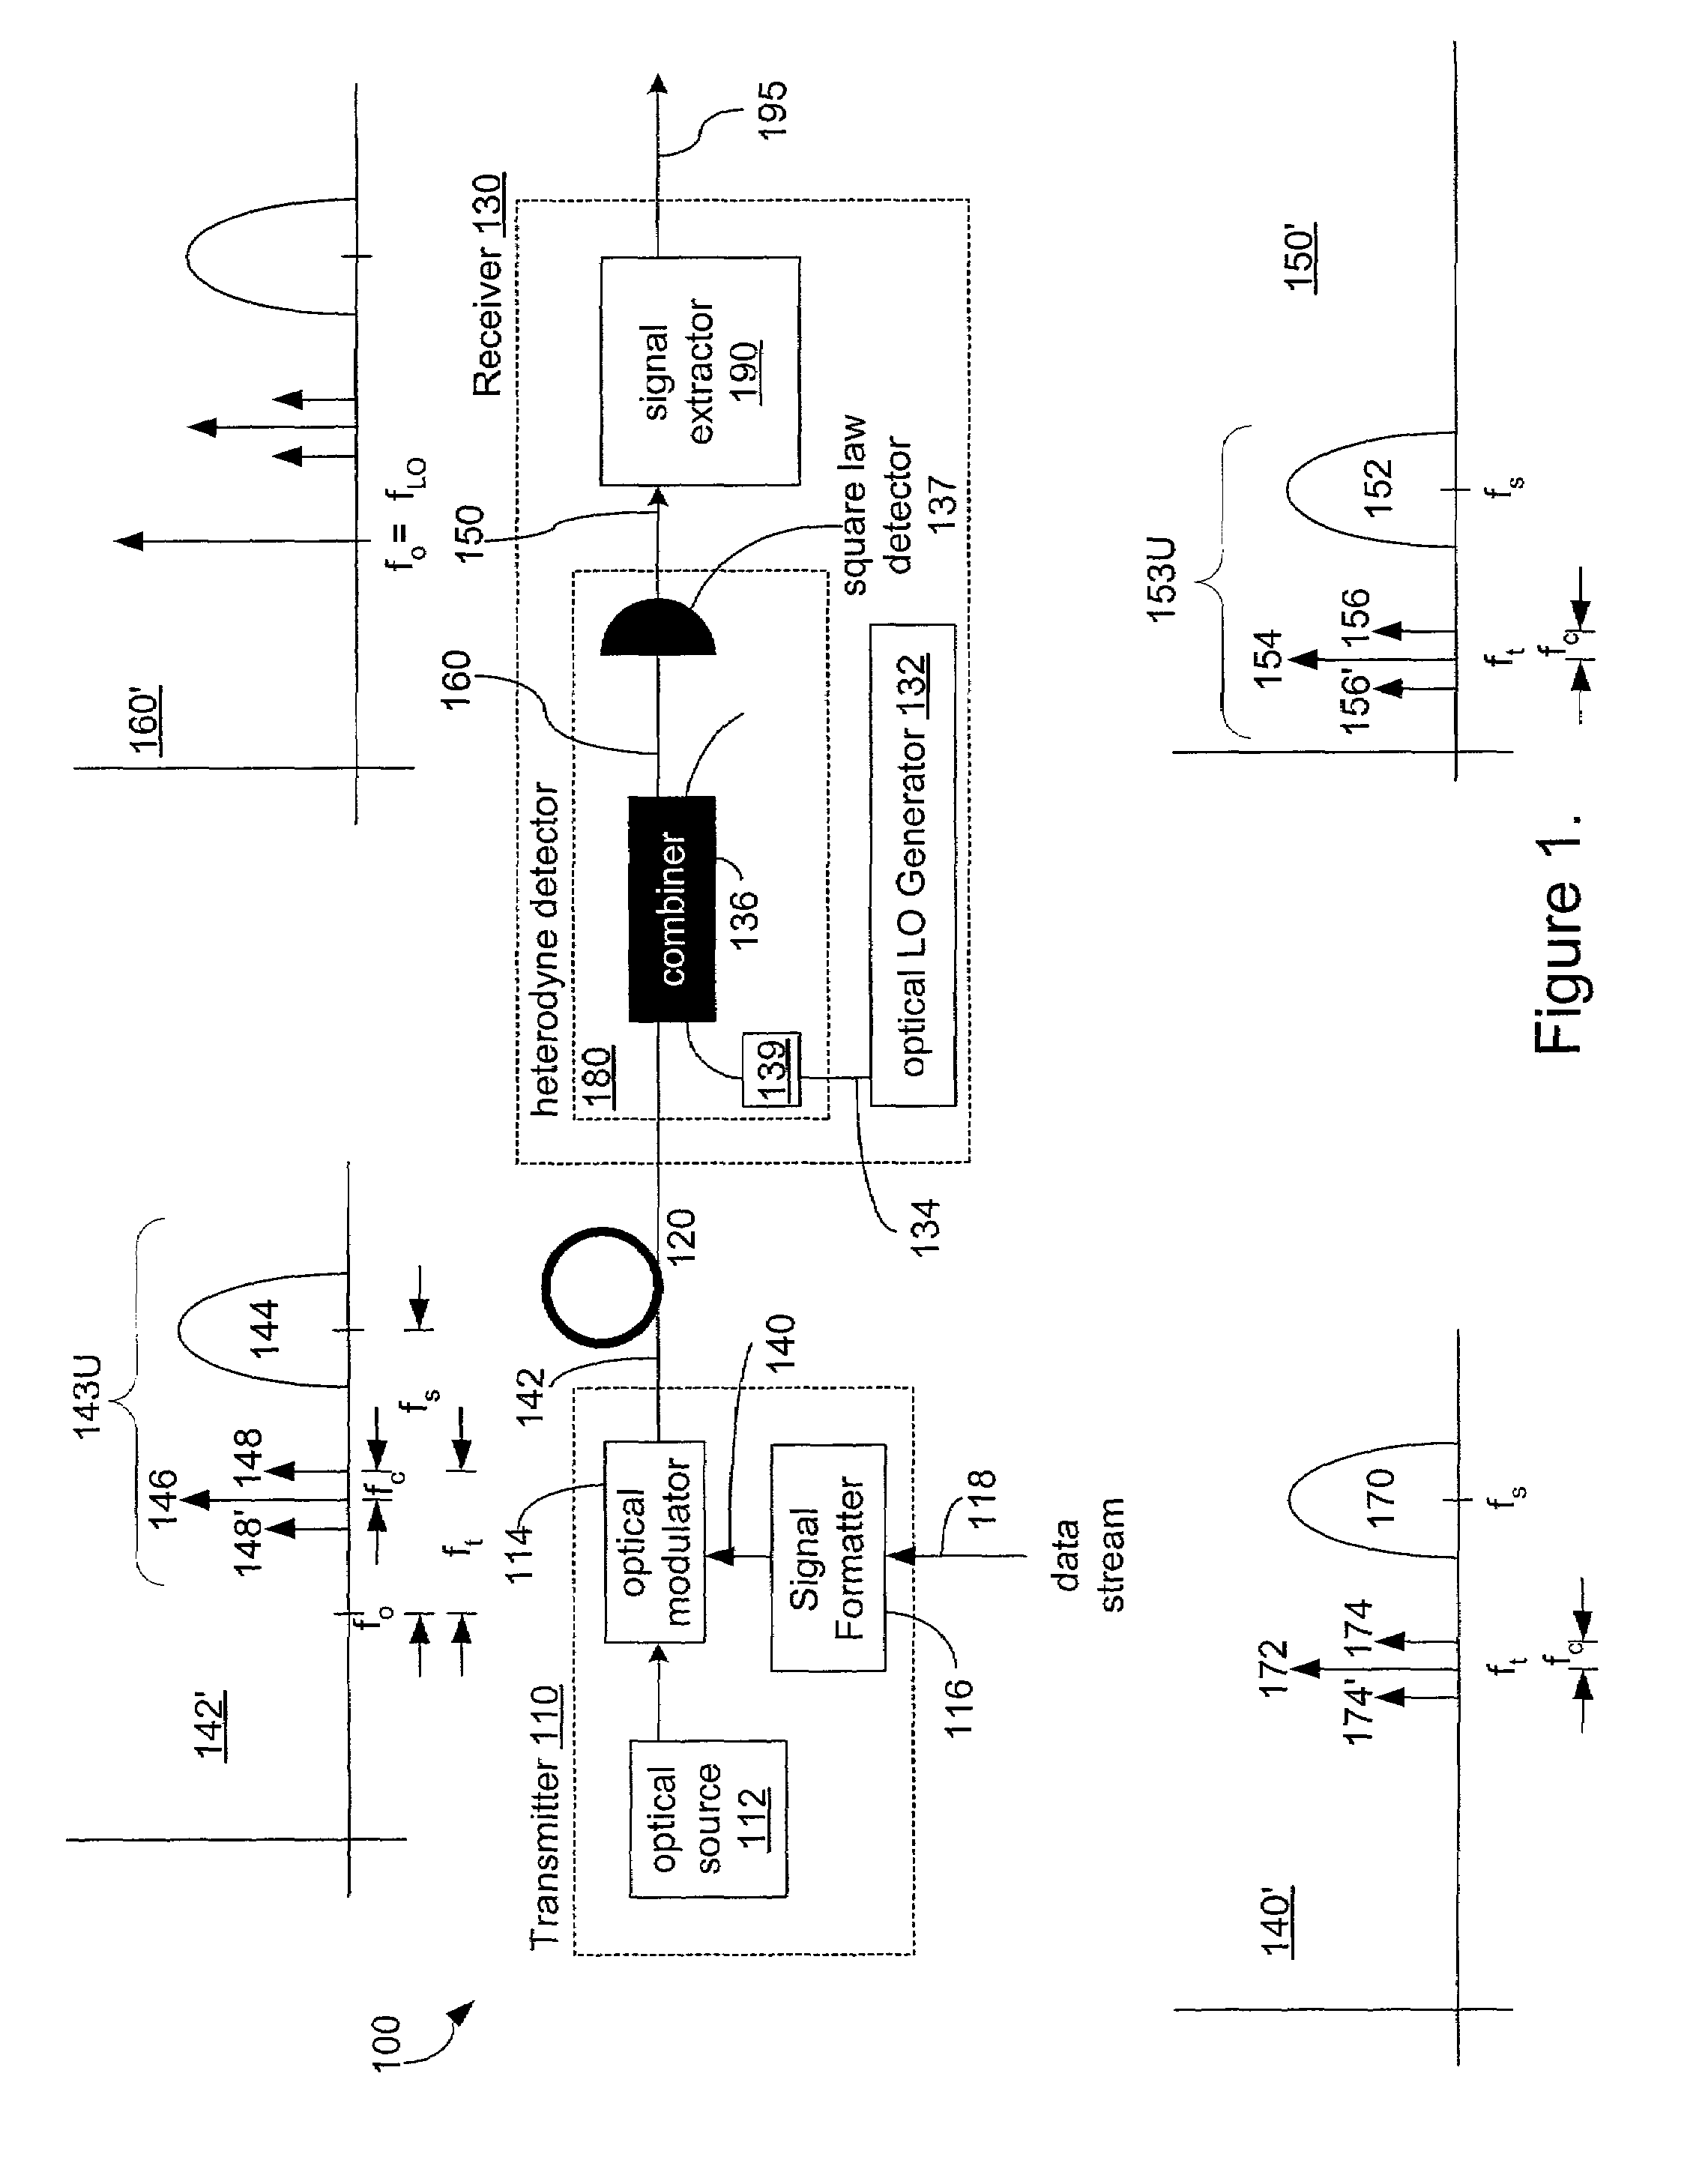 Optical transceiver using heterodyne detection and a transmitted reference clock